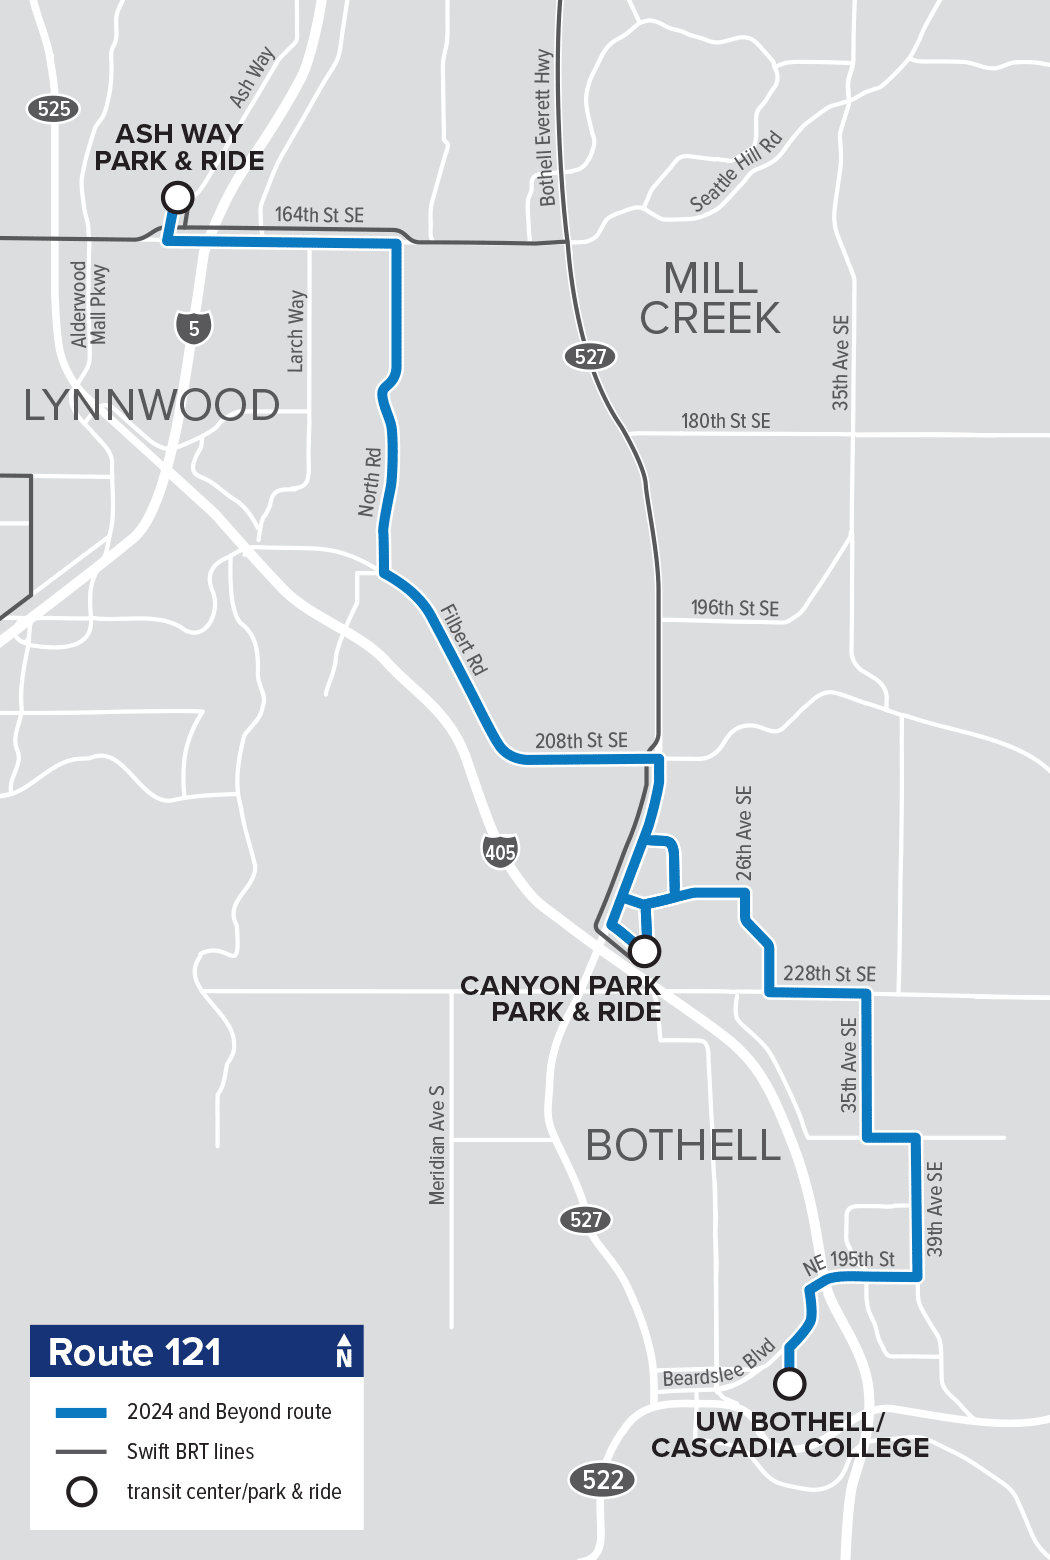 Route 121 service map